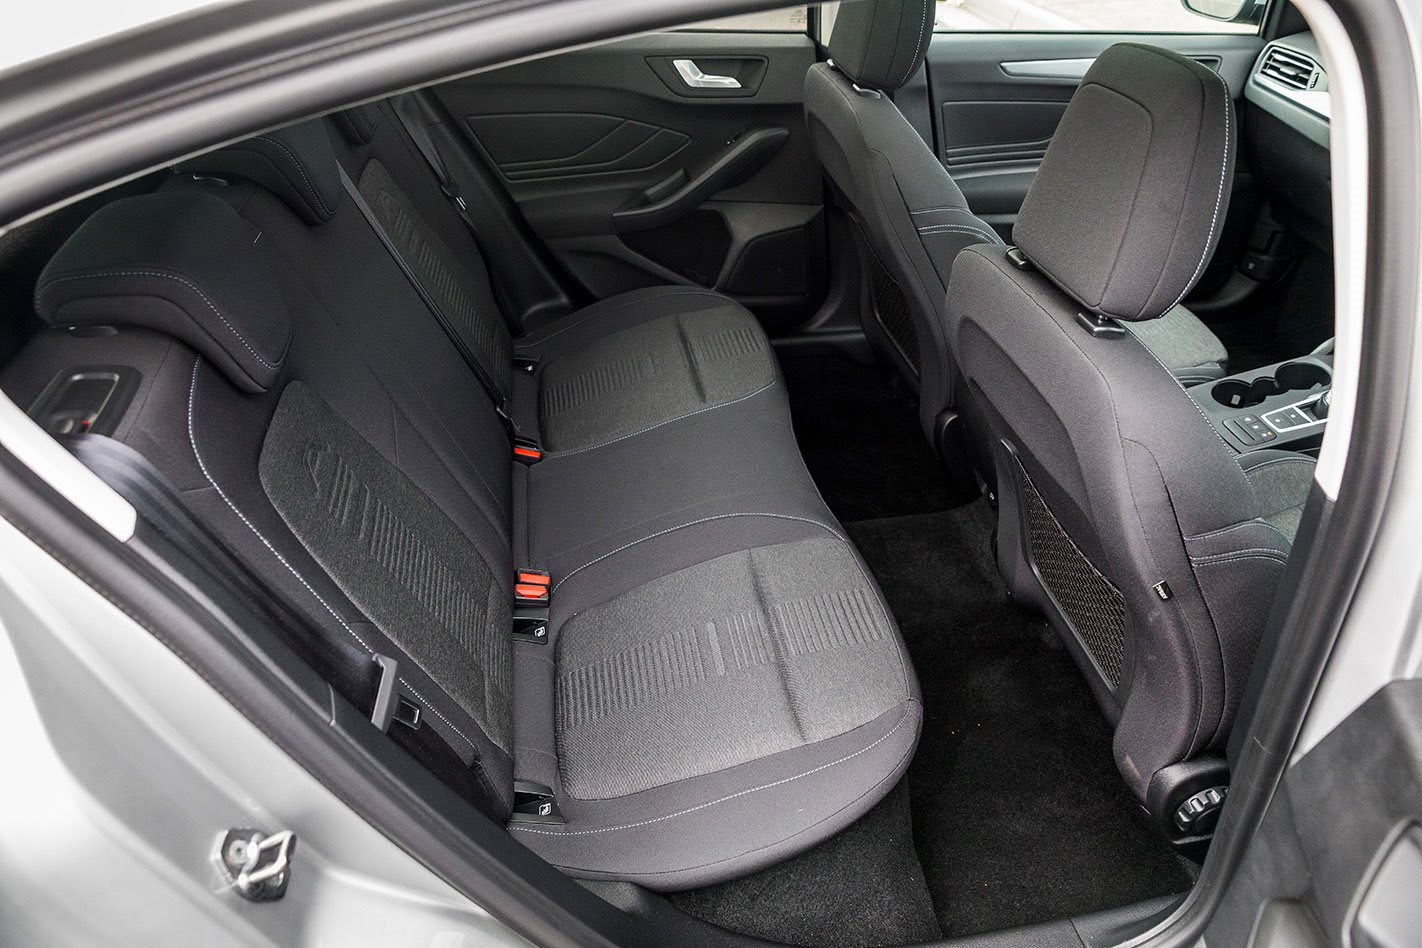 Ford Focus cabin